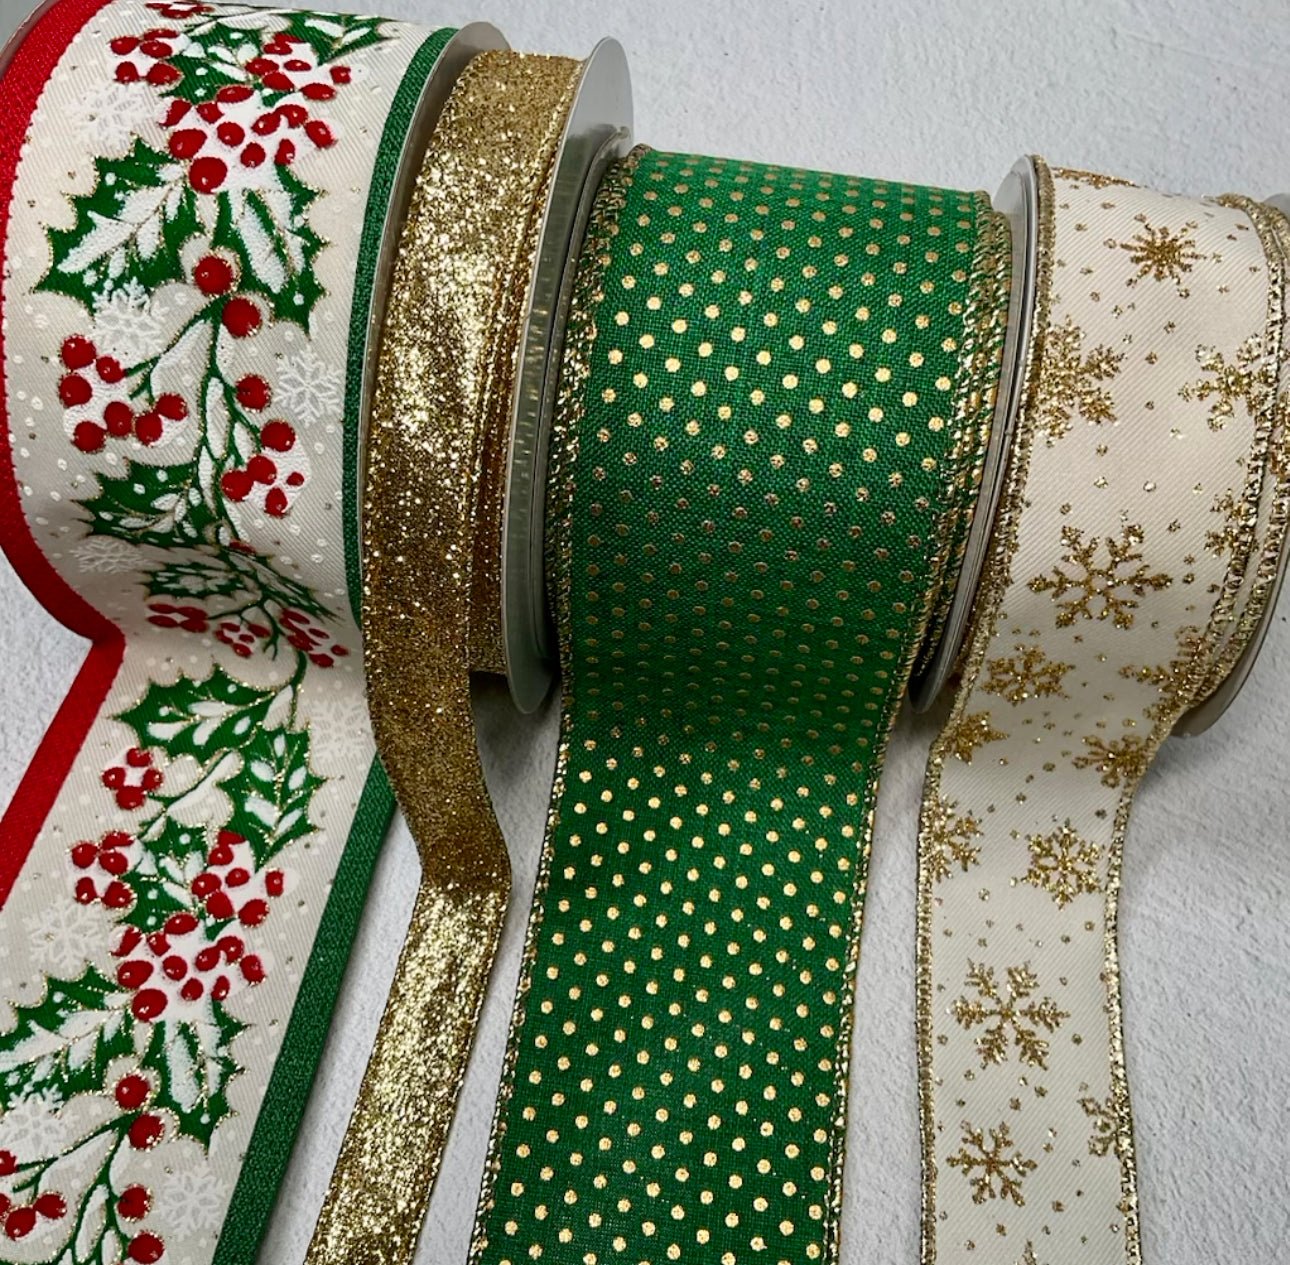 Holly and gold Christmas bow bundle - 4 rolls - Greenery MarketRibbons & Trimhollygoldx4